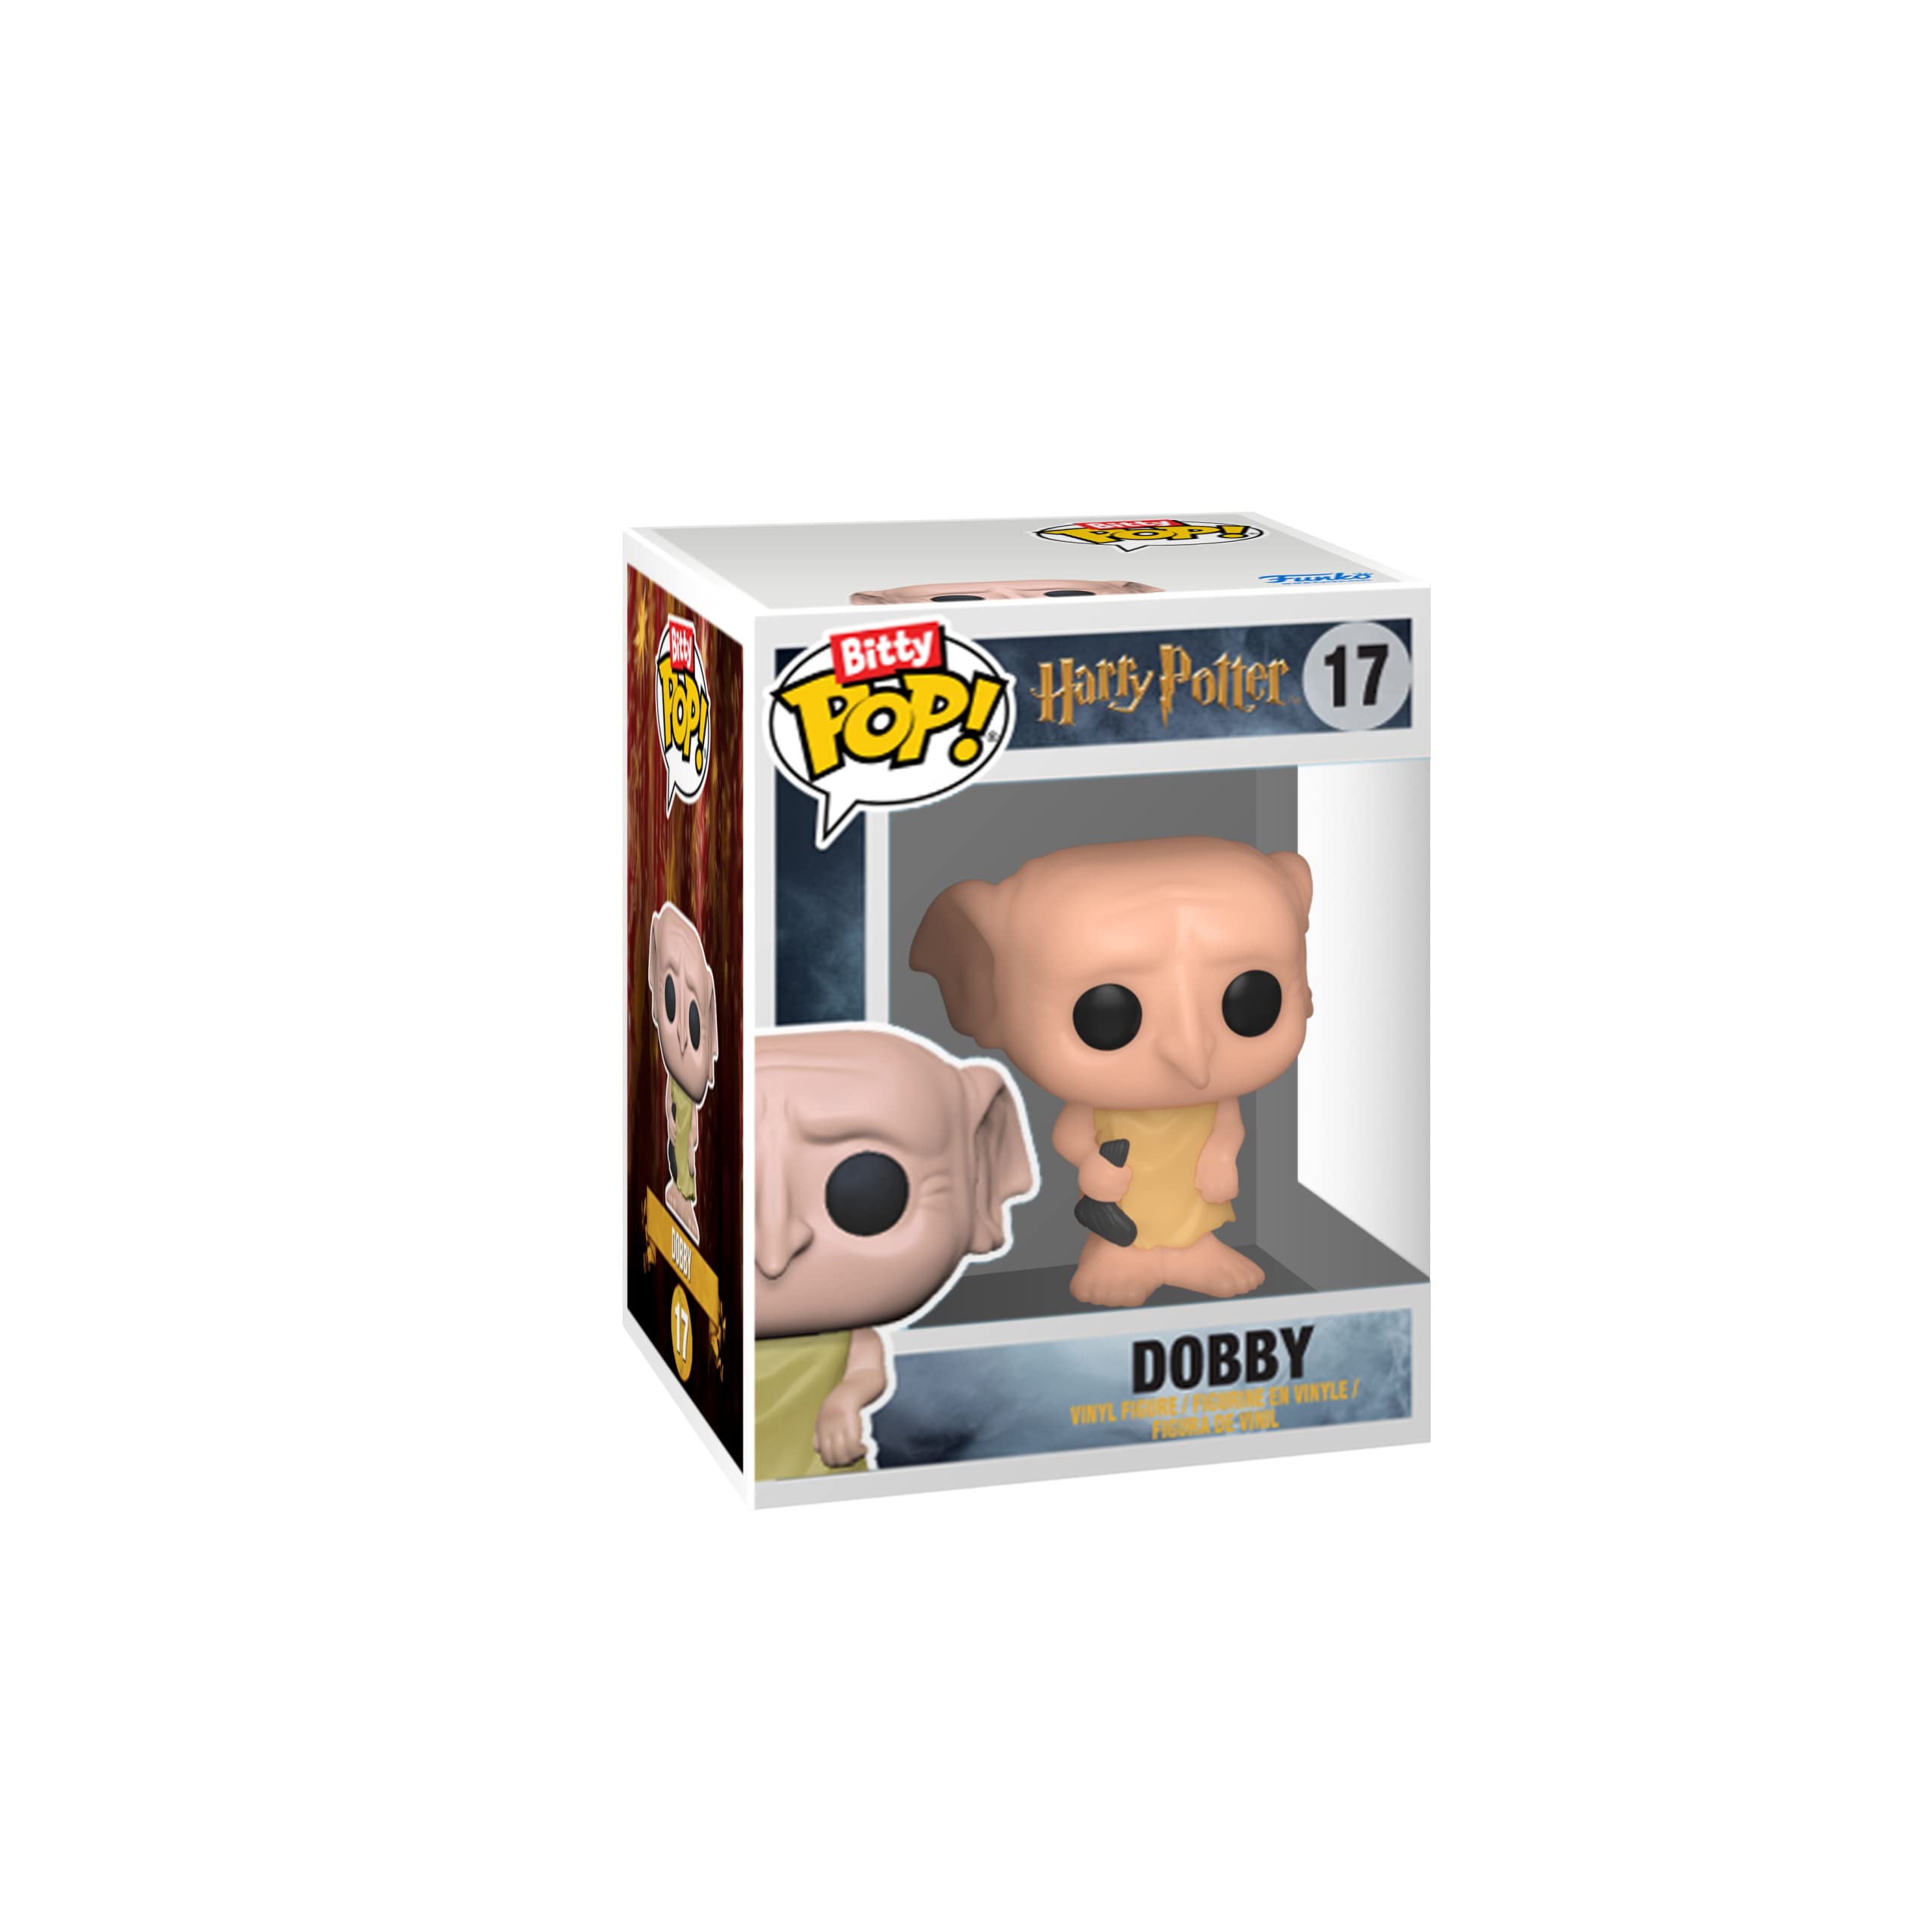 Funko Bitty Pop! Harry Potter Mini Collectible Toys - Harry Potter, Draco Malfoy, Dobby & Mystery Chase Figure (Styles May Vary) 4-Pack